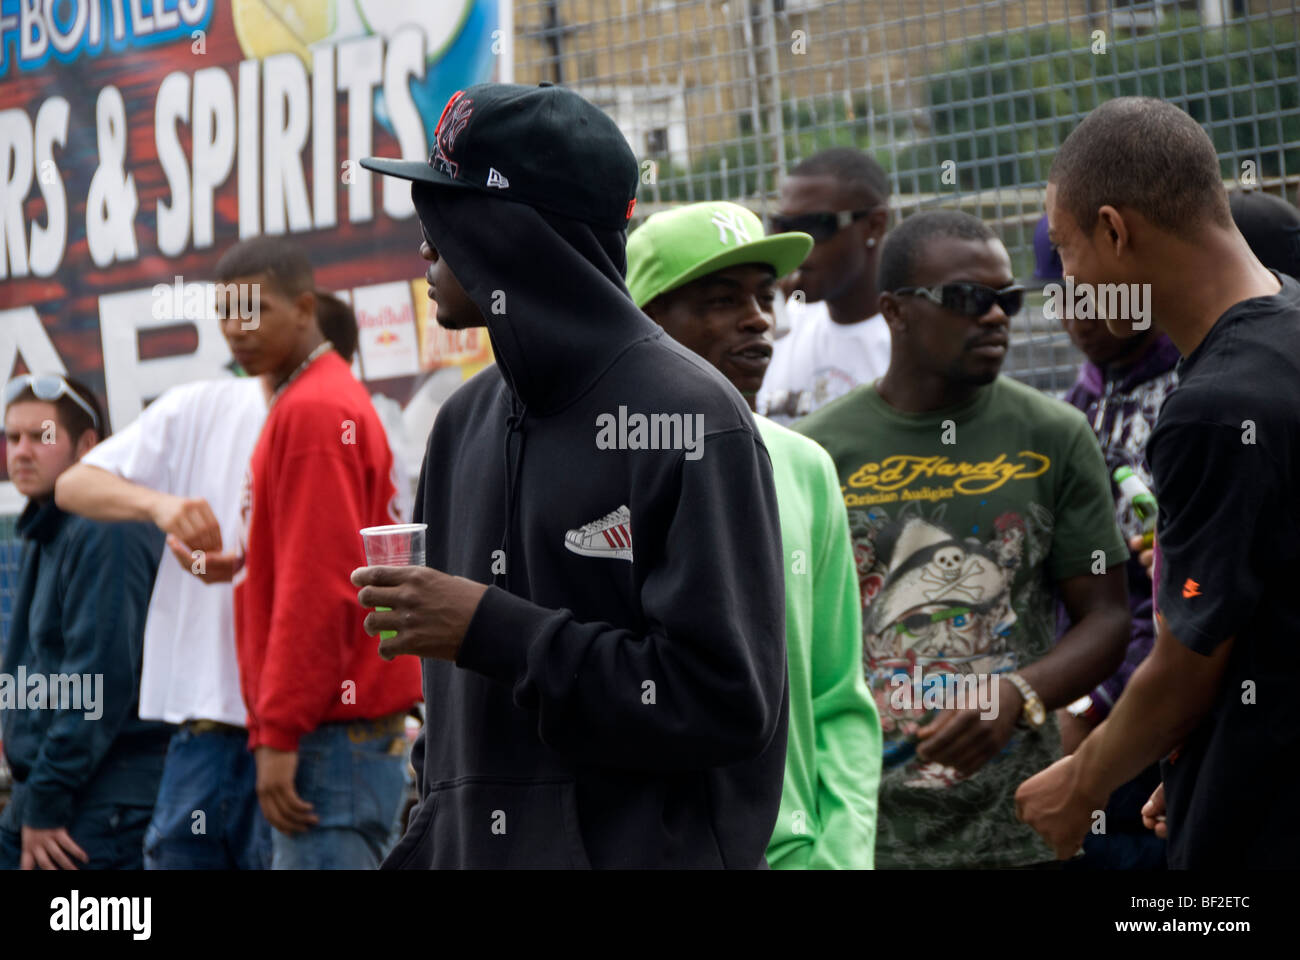 Young men hanging about during Notting Hill Carnival Stock Photo